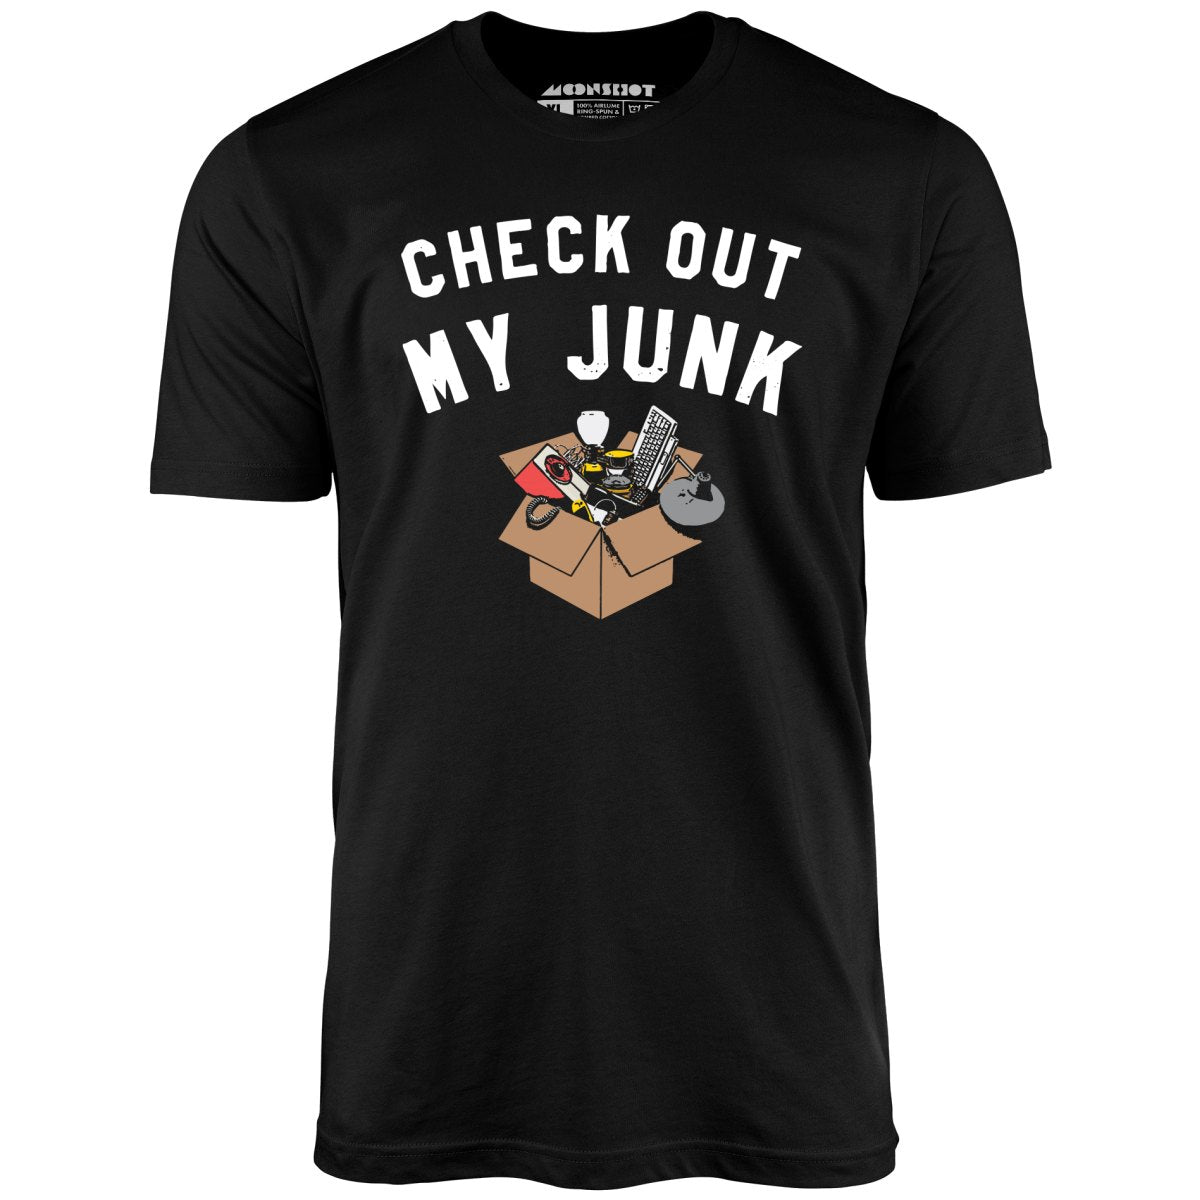 Check Out My Junk - Unisex T-Shirt